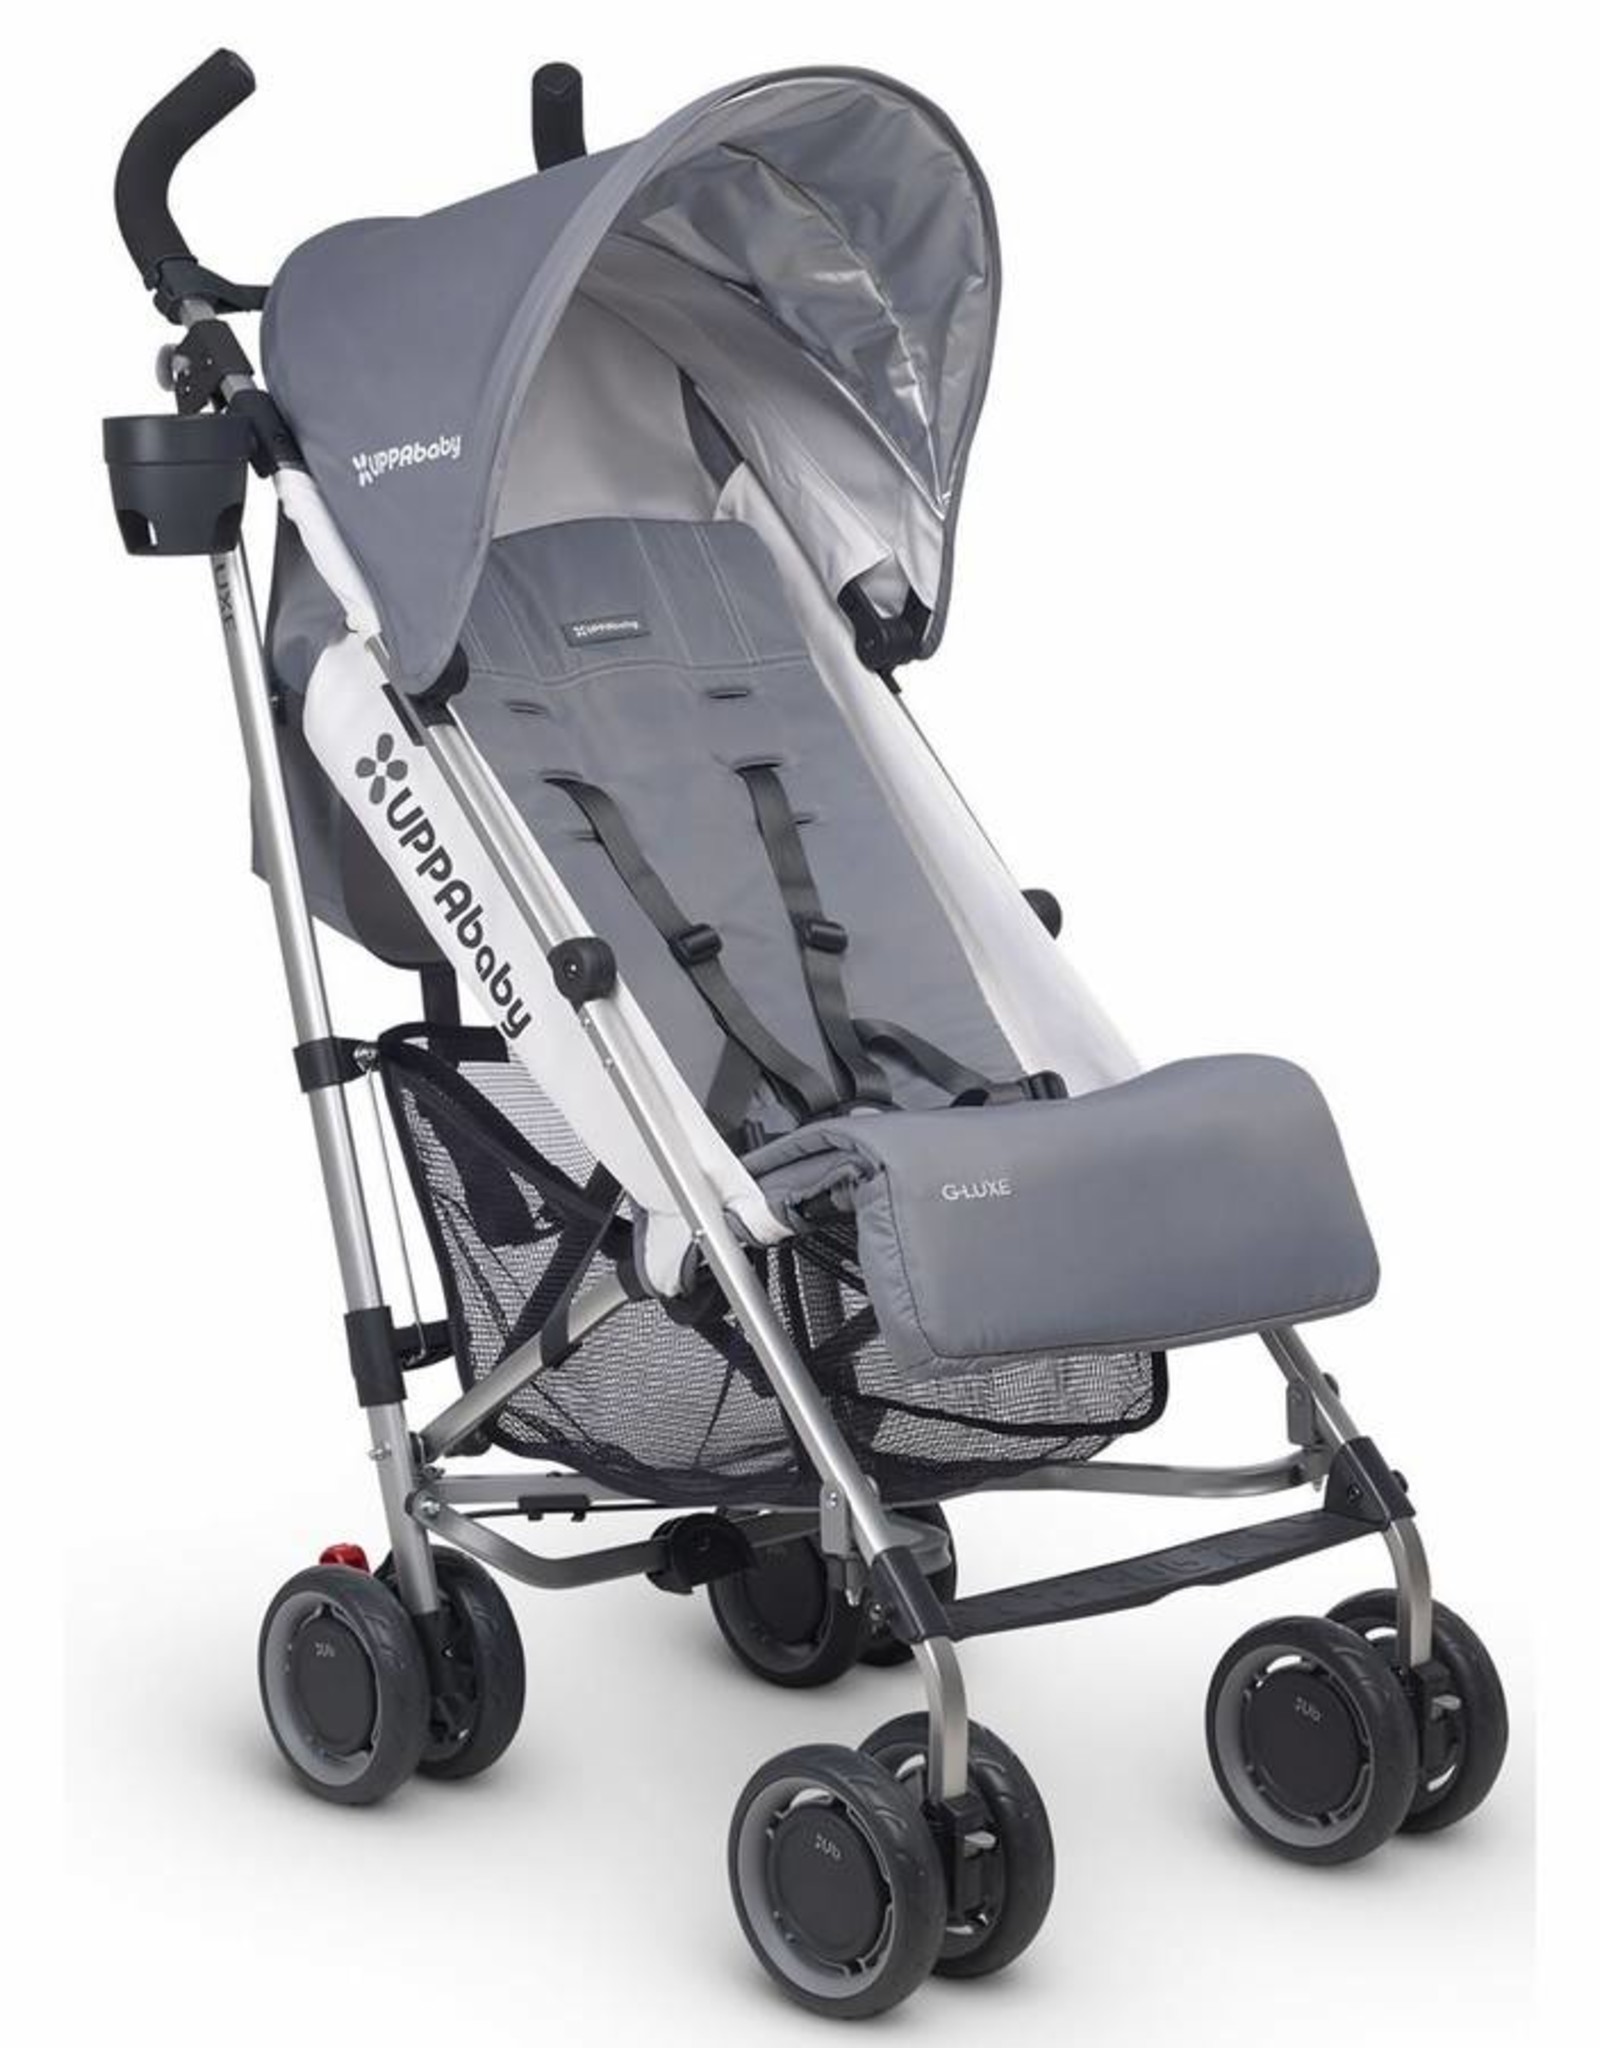 Uppababy UppaBaby G-Luxe Stroller